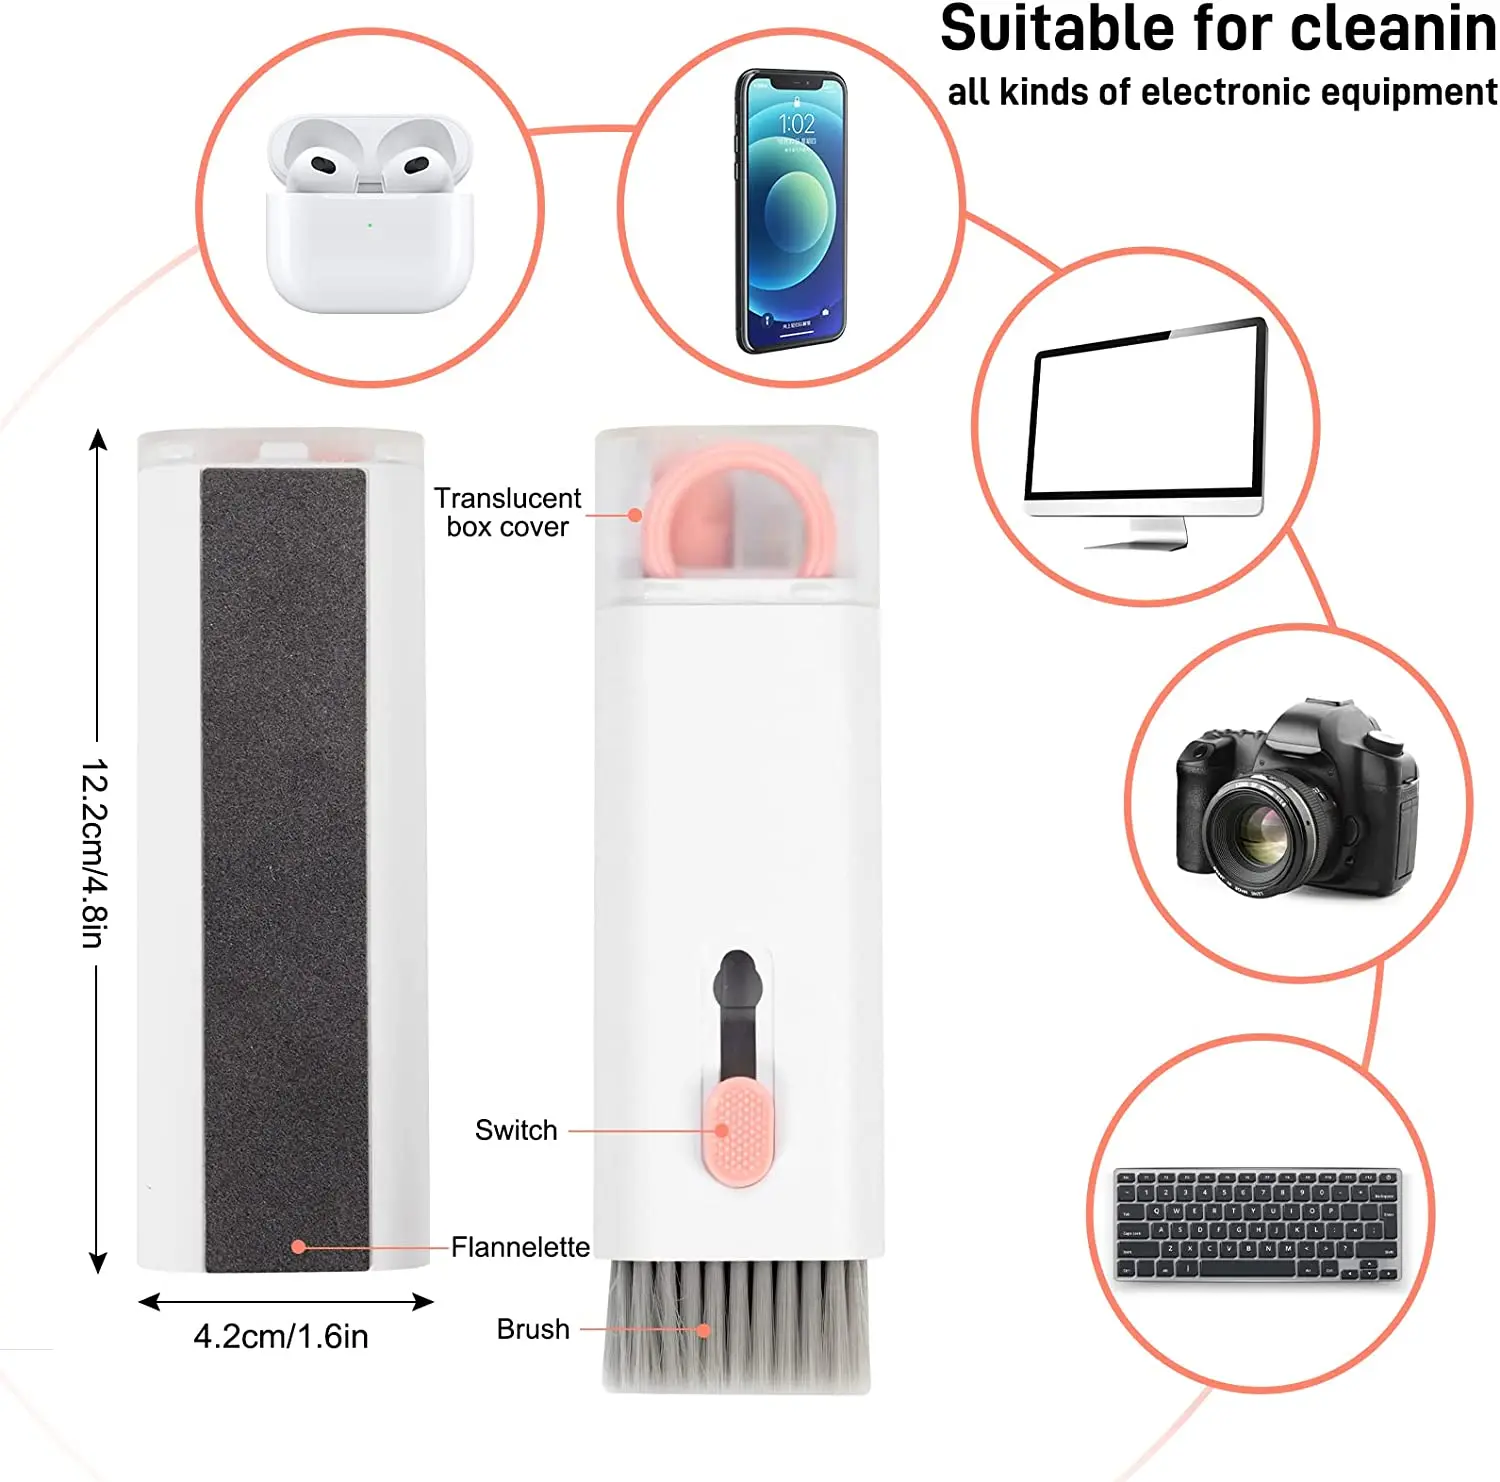 7-in-1 For Keyboard Cleaner Earphones Cleaning Pen Keycap Puller Set Multifunctional CleaningKit For AirPods iPhone iMac MacBook